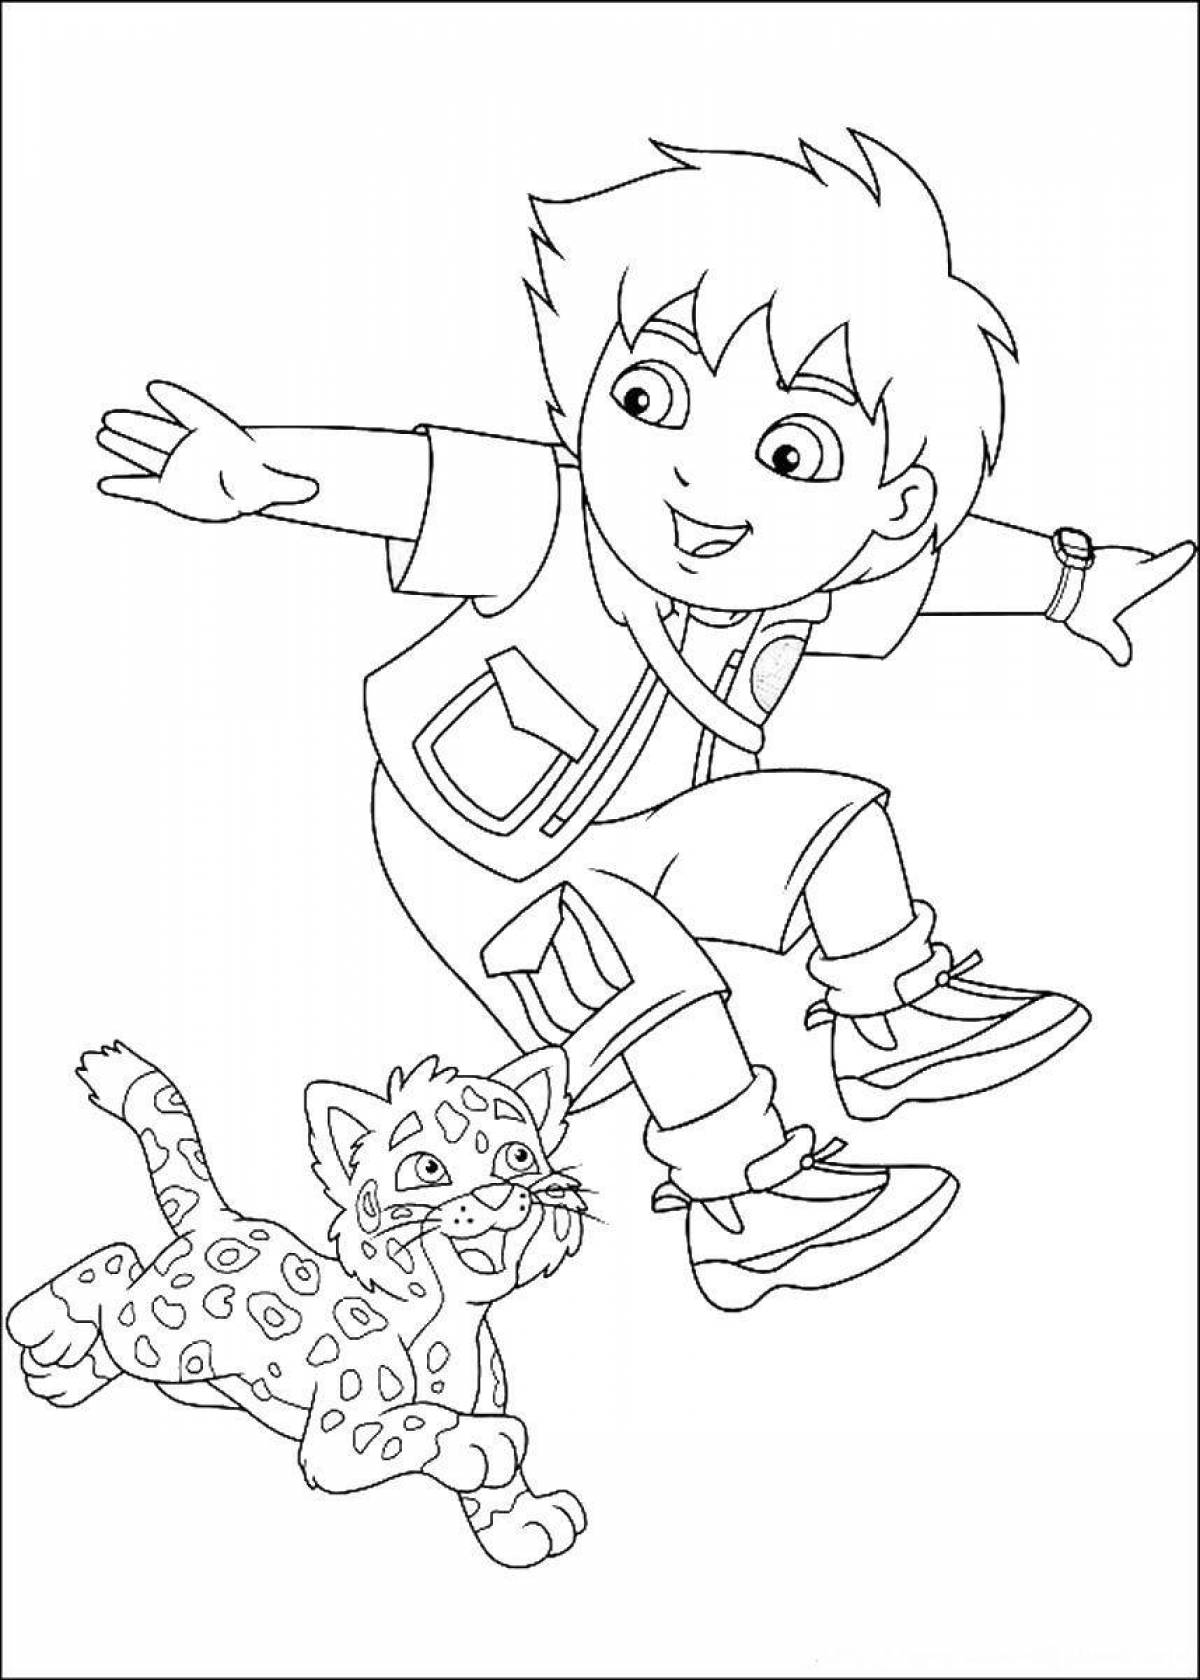 Diego go's amazing coloring page